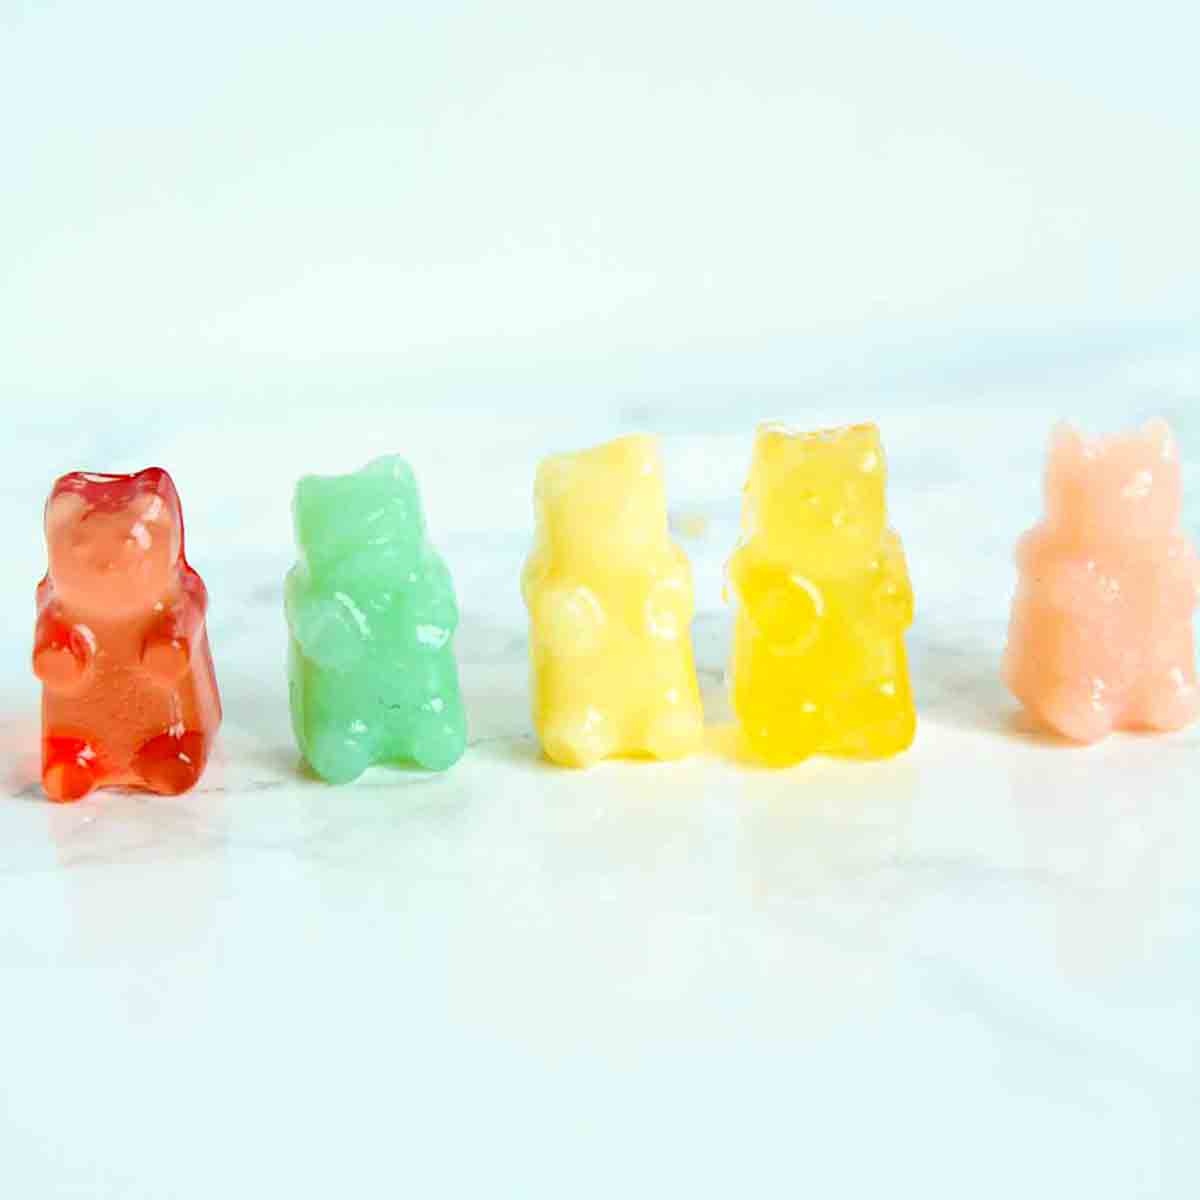 how to make gummy bear candy with silicone gummy molds 